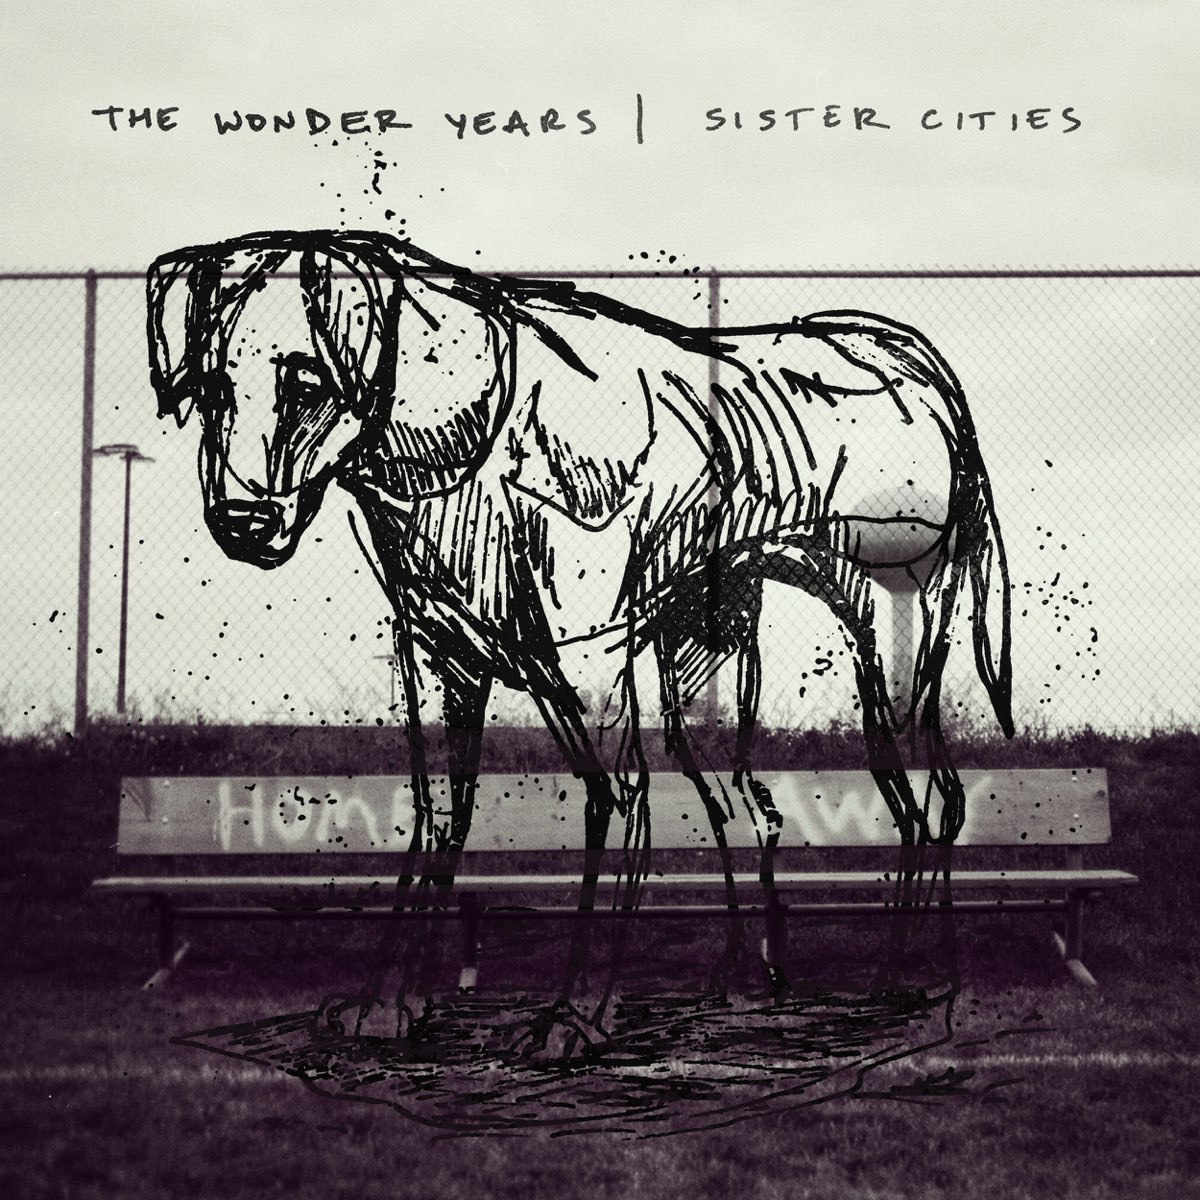 Sister cities. The Wonder years группа обложка альбома sister Cities. Be the Wonder. The Wonder years i'm not Sad anymore.